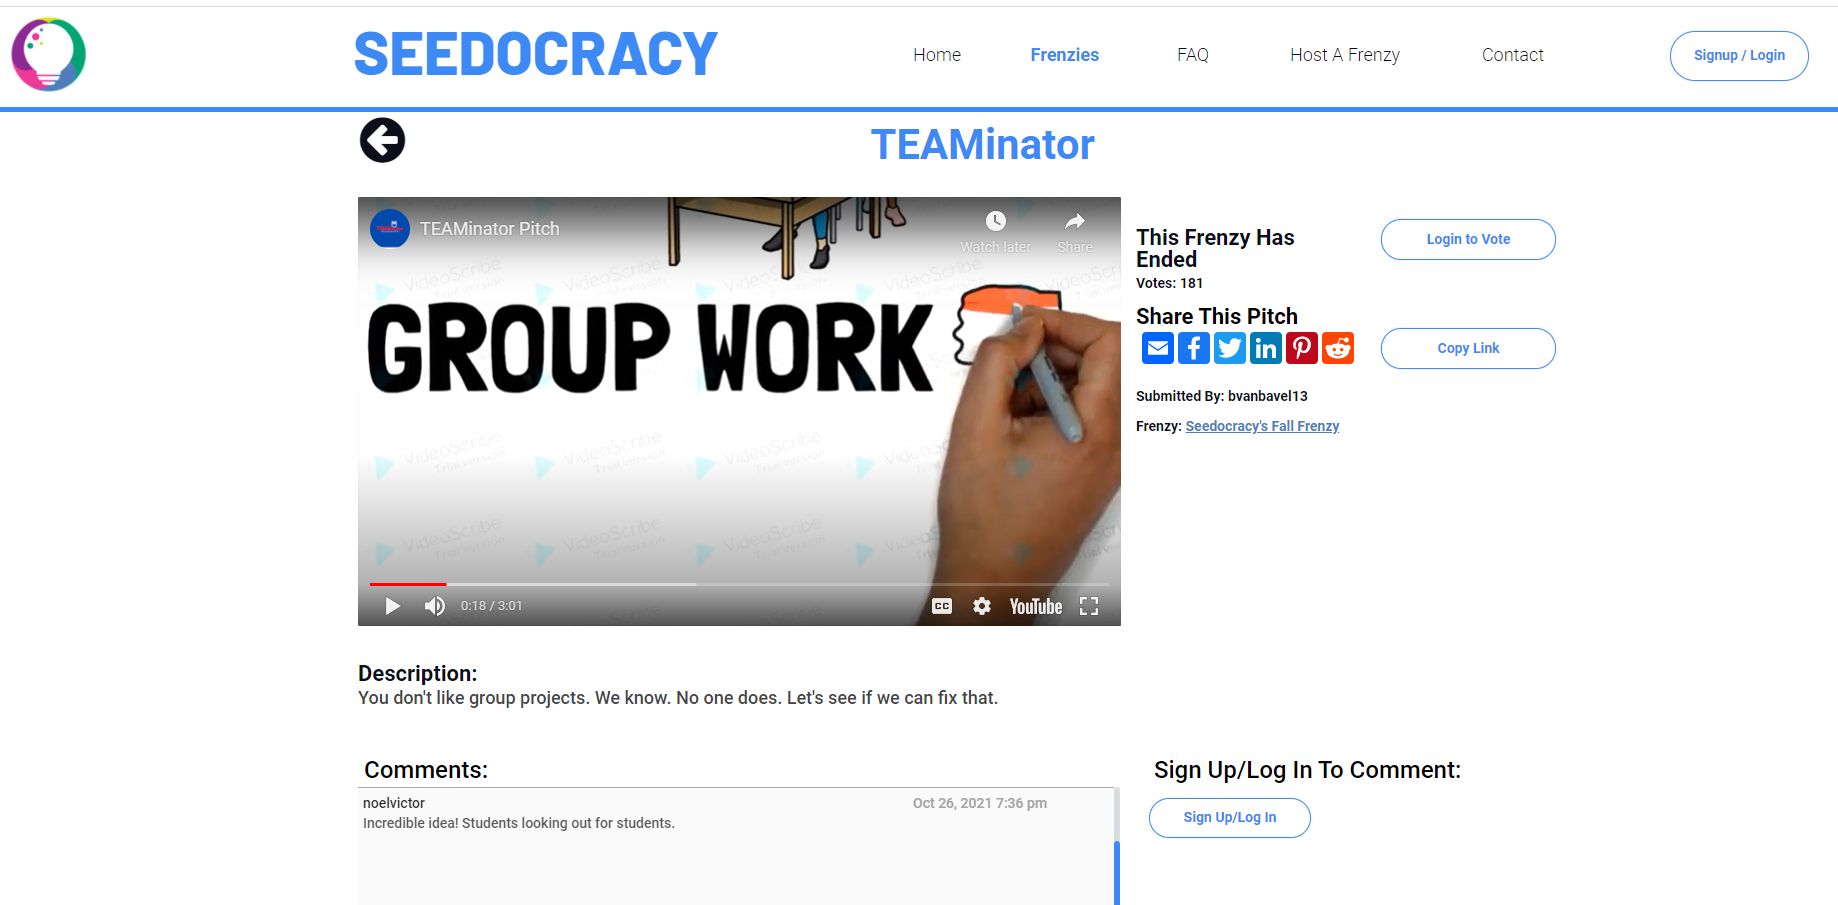 A recent winning idea in a virtual pitch competition on Seedocracy